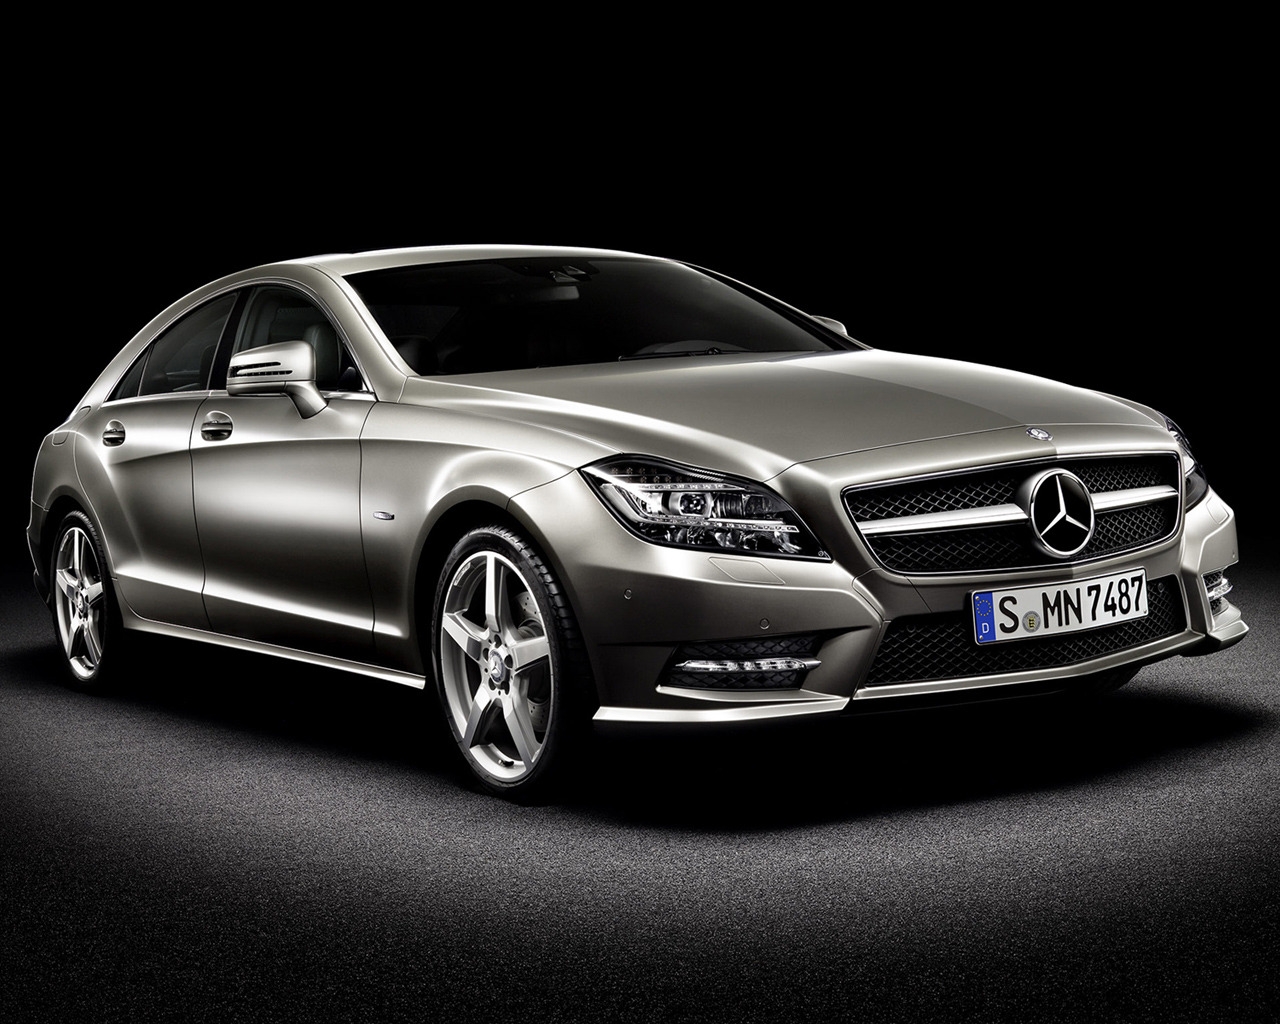 Mercedes CLS 2010 for 1280 x 1024 resolution